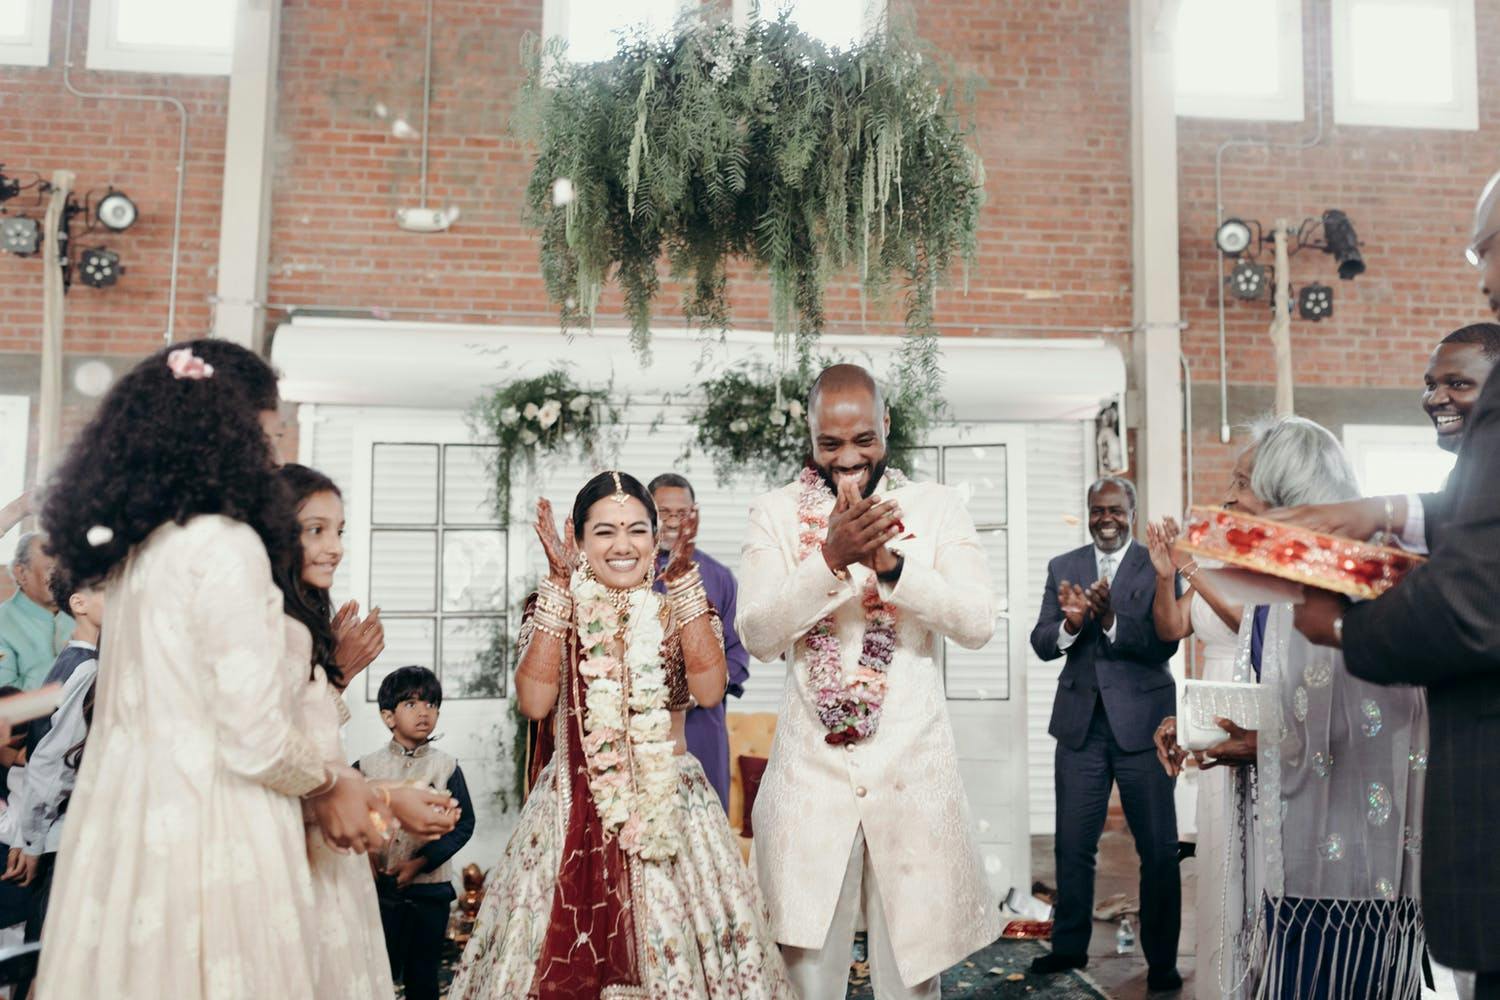 Recessional at South Asian wedding with overhanging organic greenery | PartySlate